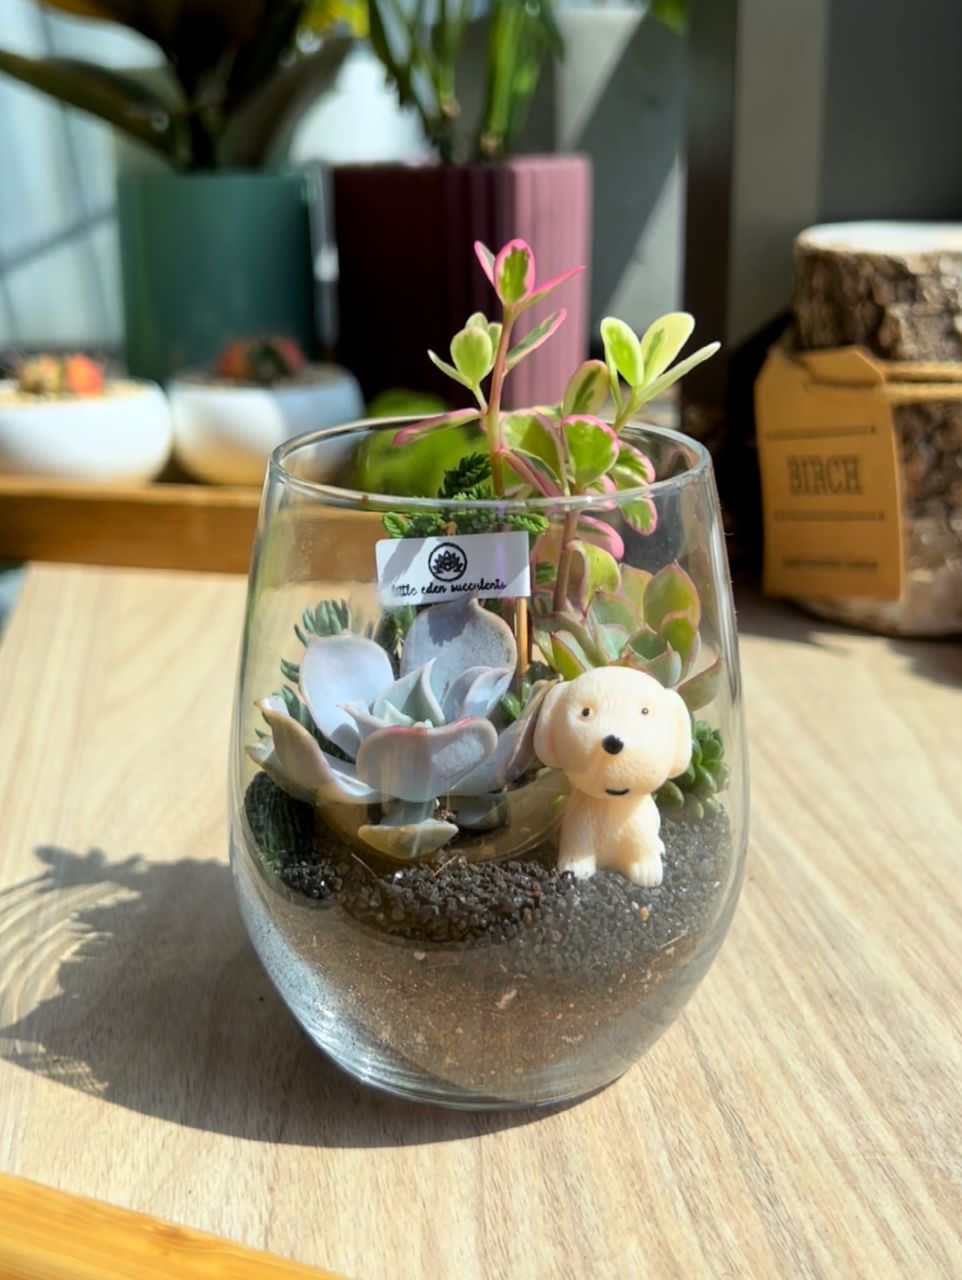 How to multiply succulents from one terrarium?